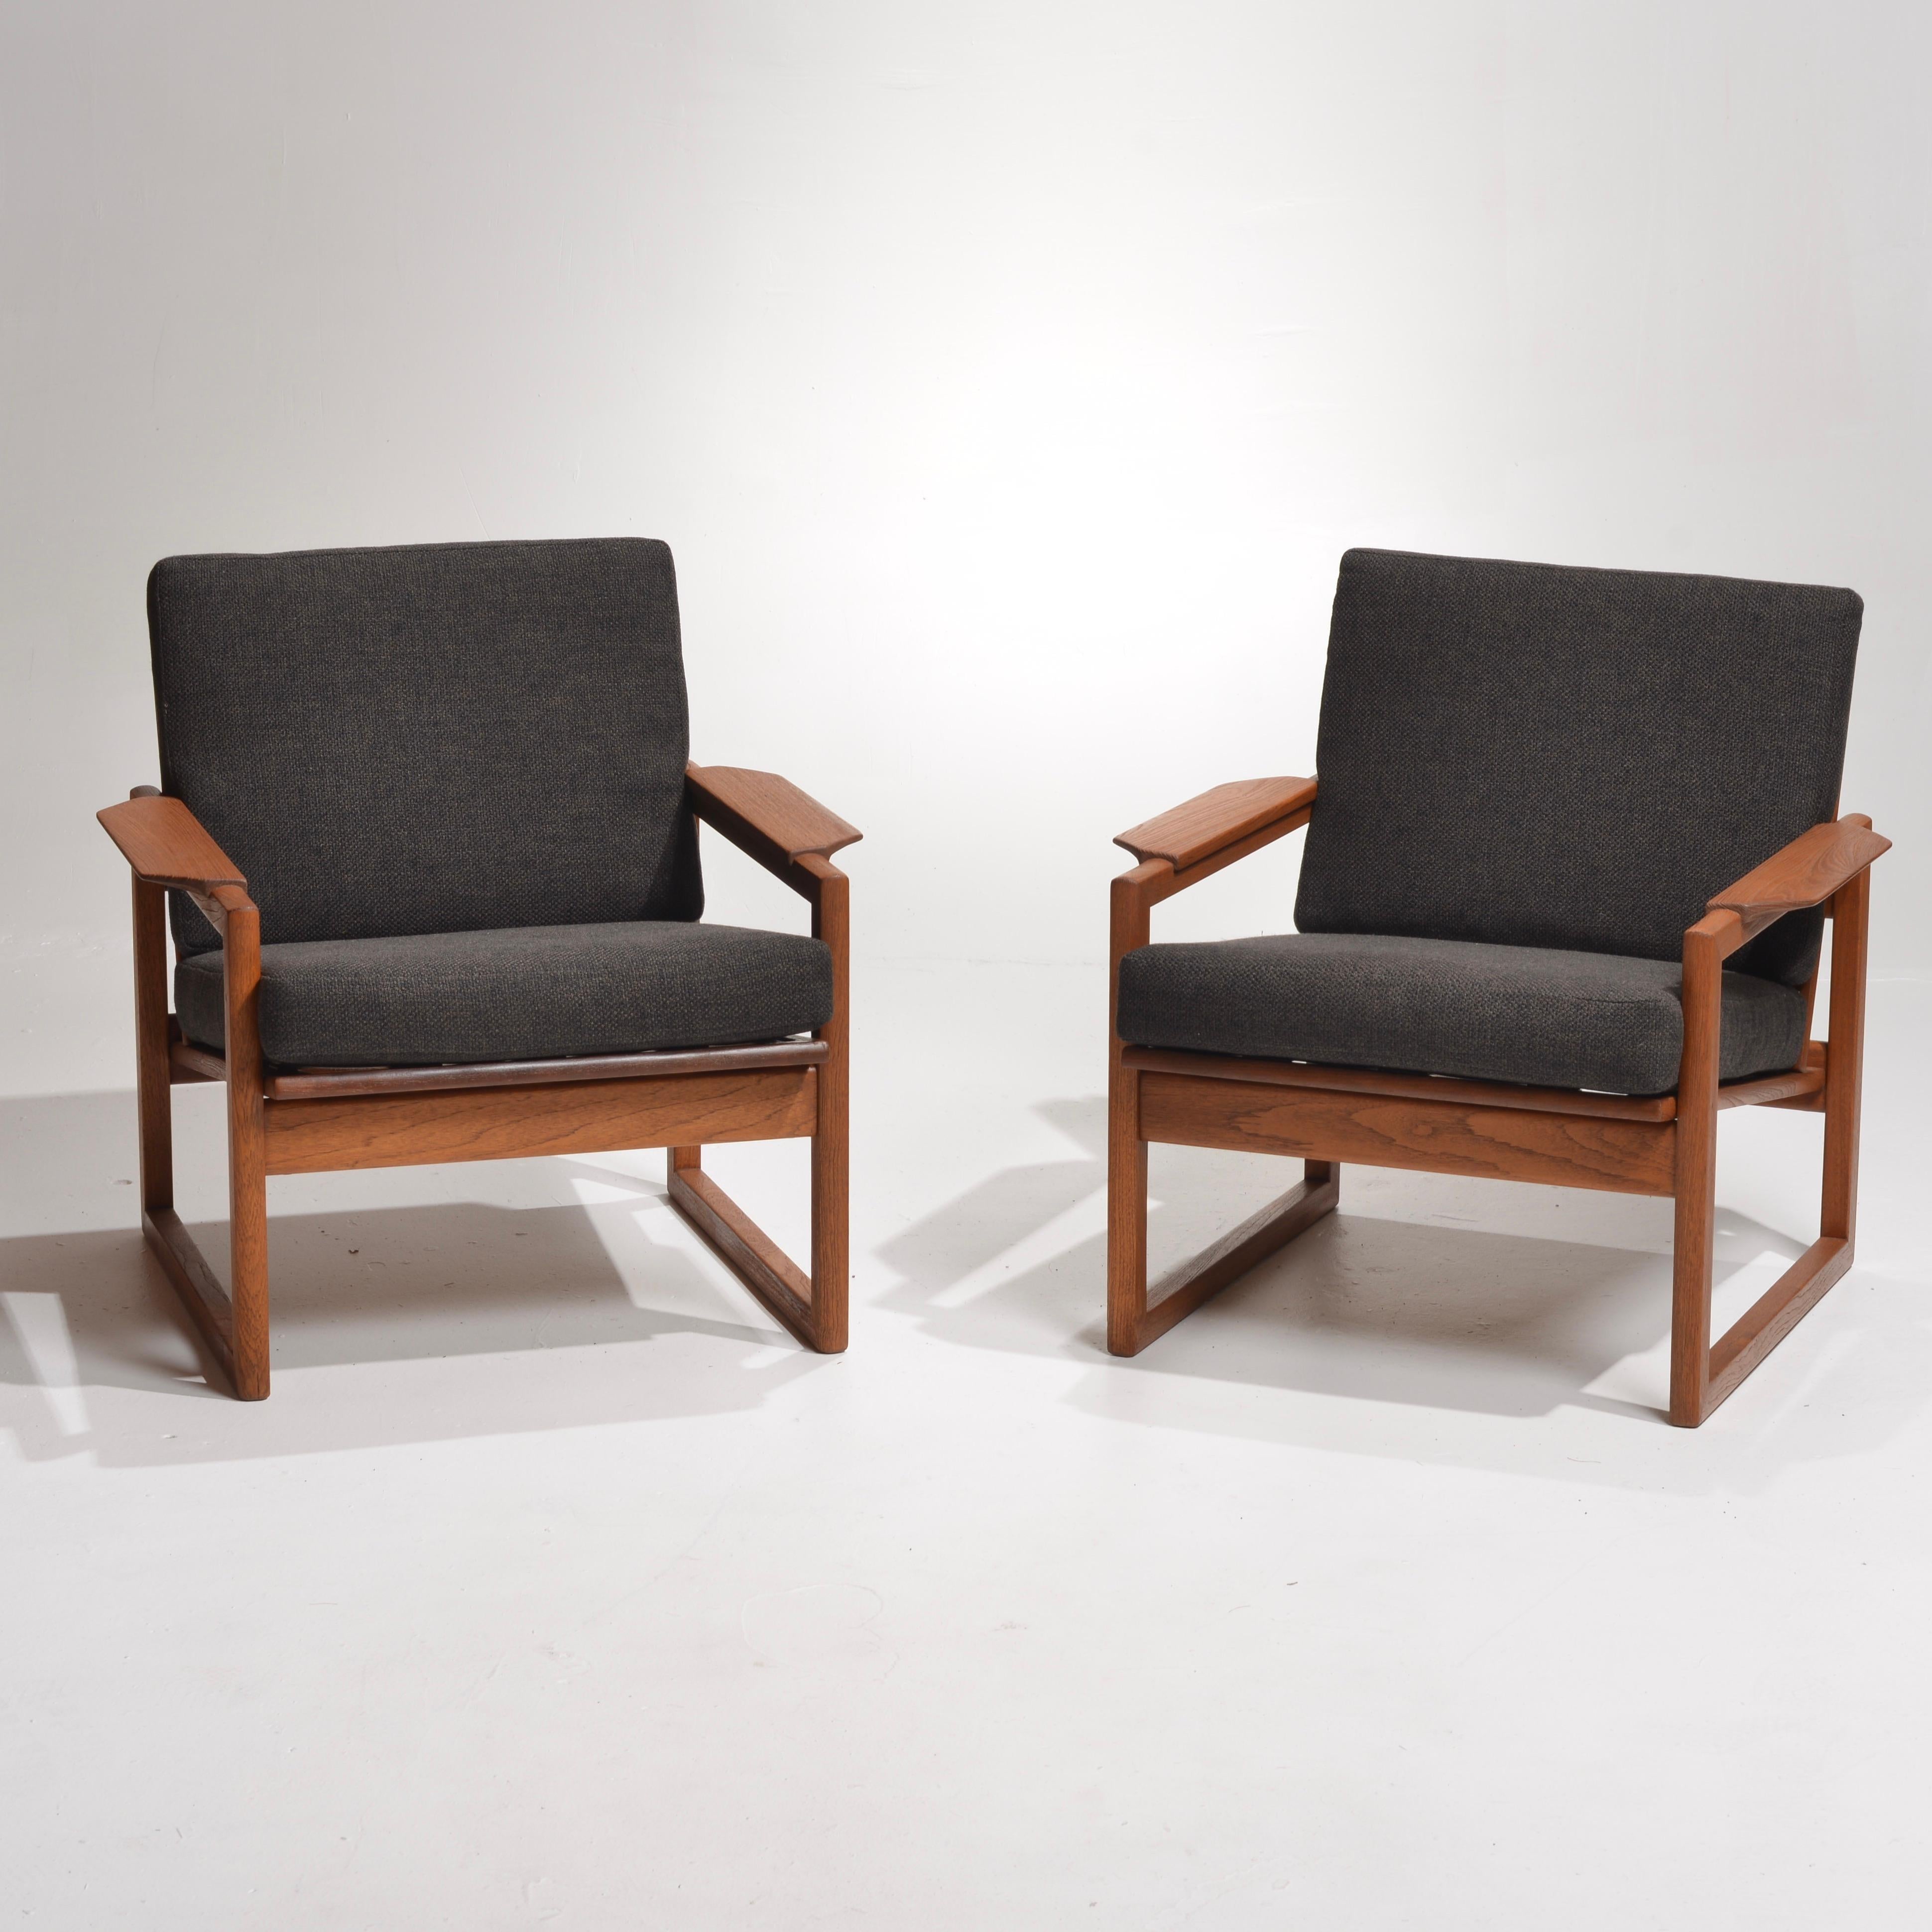 Mid-Century Modern pair of lounge chairs in teak designed by Sven Ellekaer, imported by Selig, Denmark. Features sculptural armrests with a slatted backrest support that can be displayed from all angles. Slate color fabric upholstery over 3.5 inch